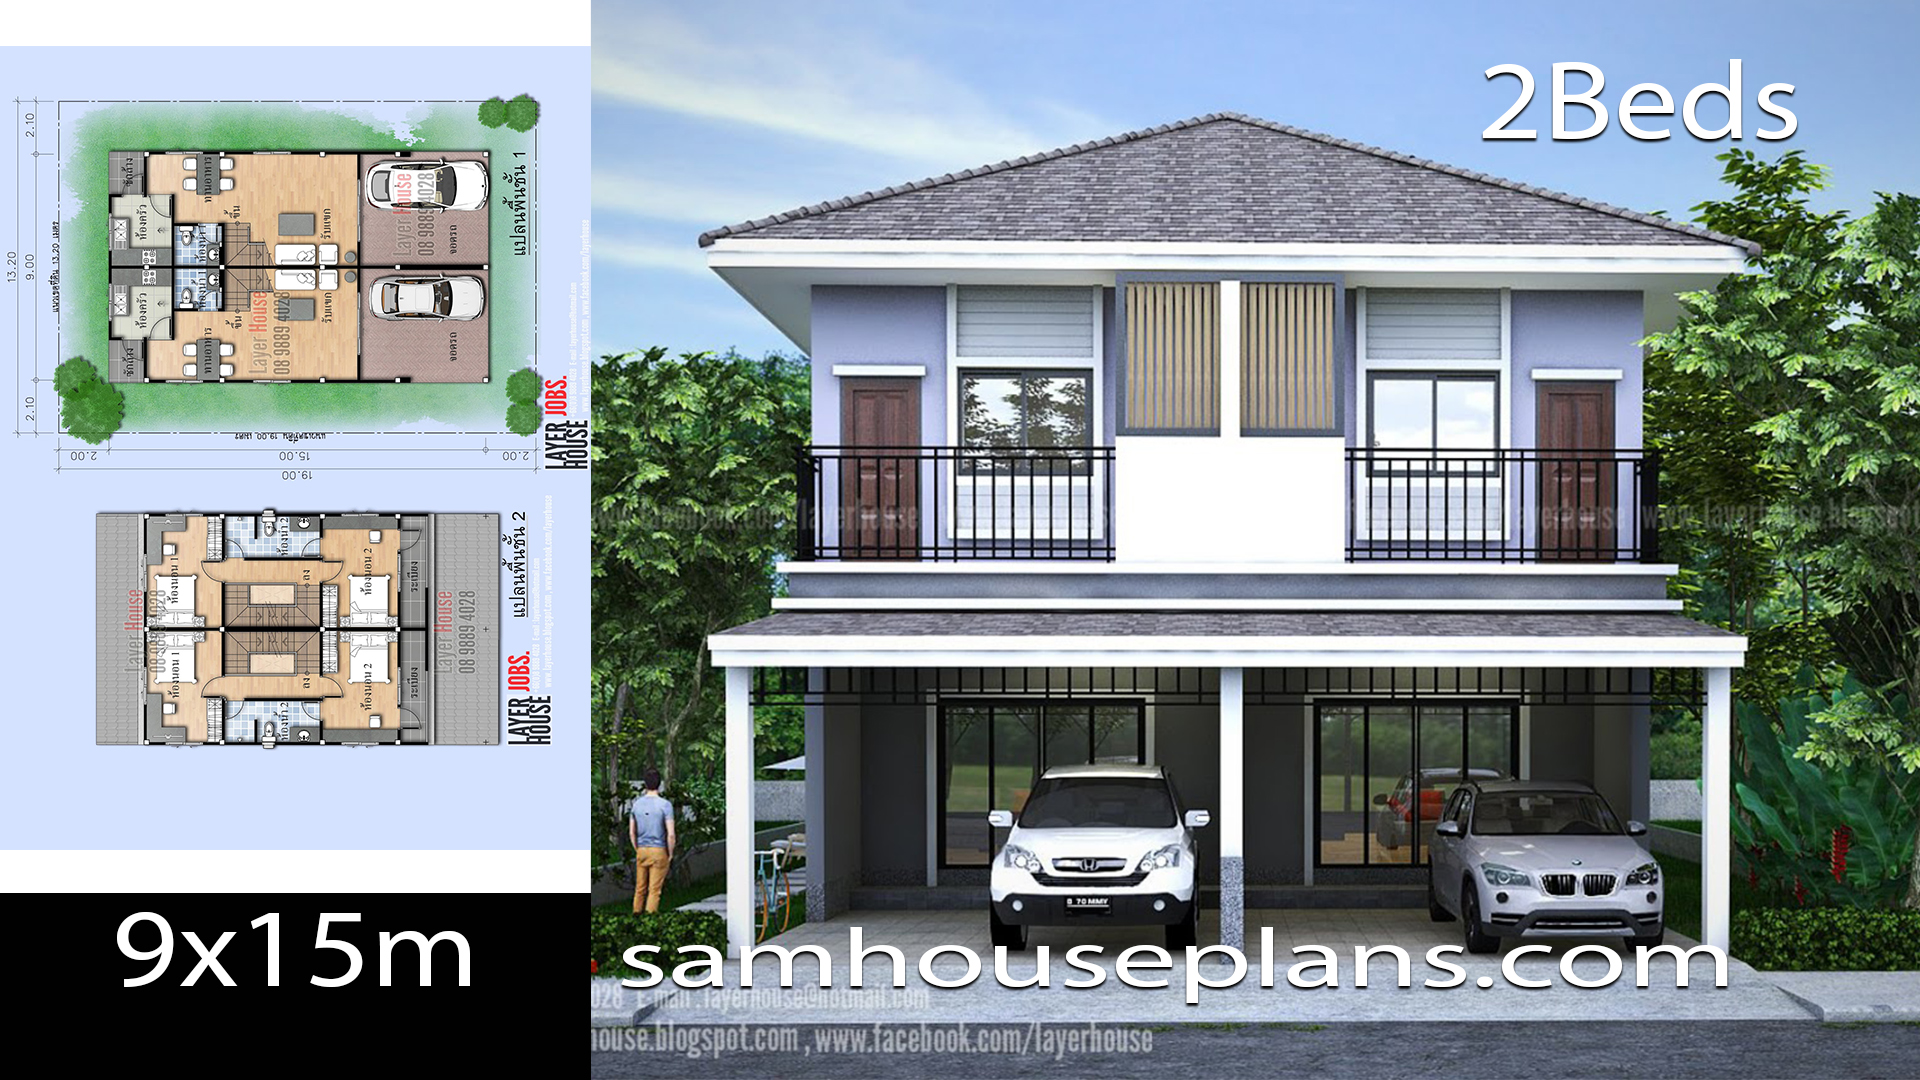 Twin House plans idea 9x15m with 2 Bedrooms each